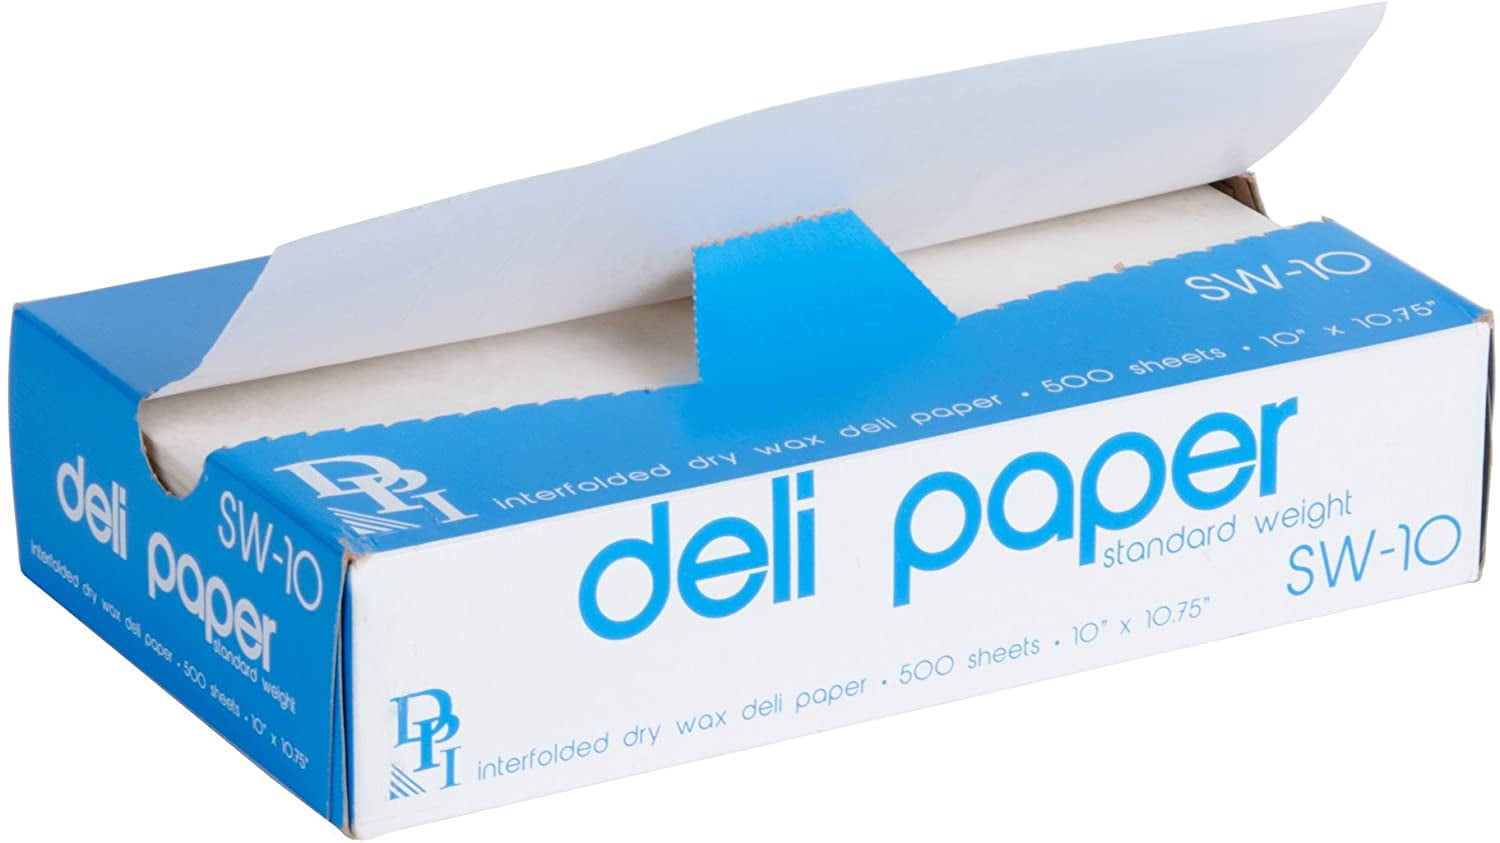 Durable Packaging 6 x 10 3/4 Interfolded Deli Wrap Wax Paper